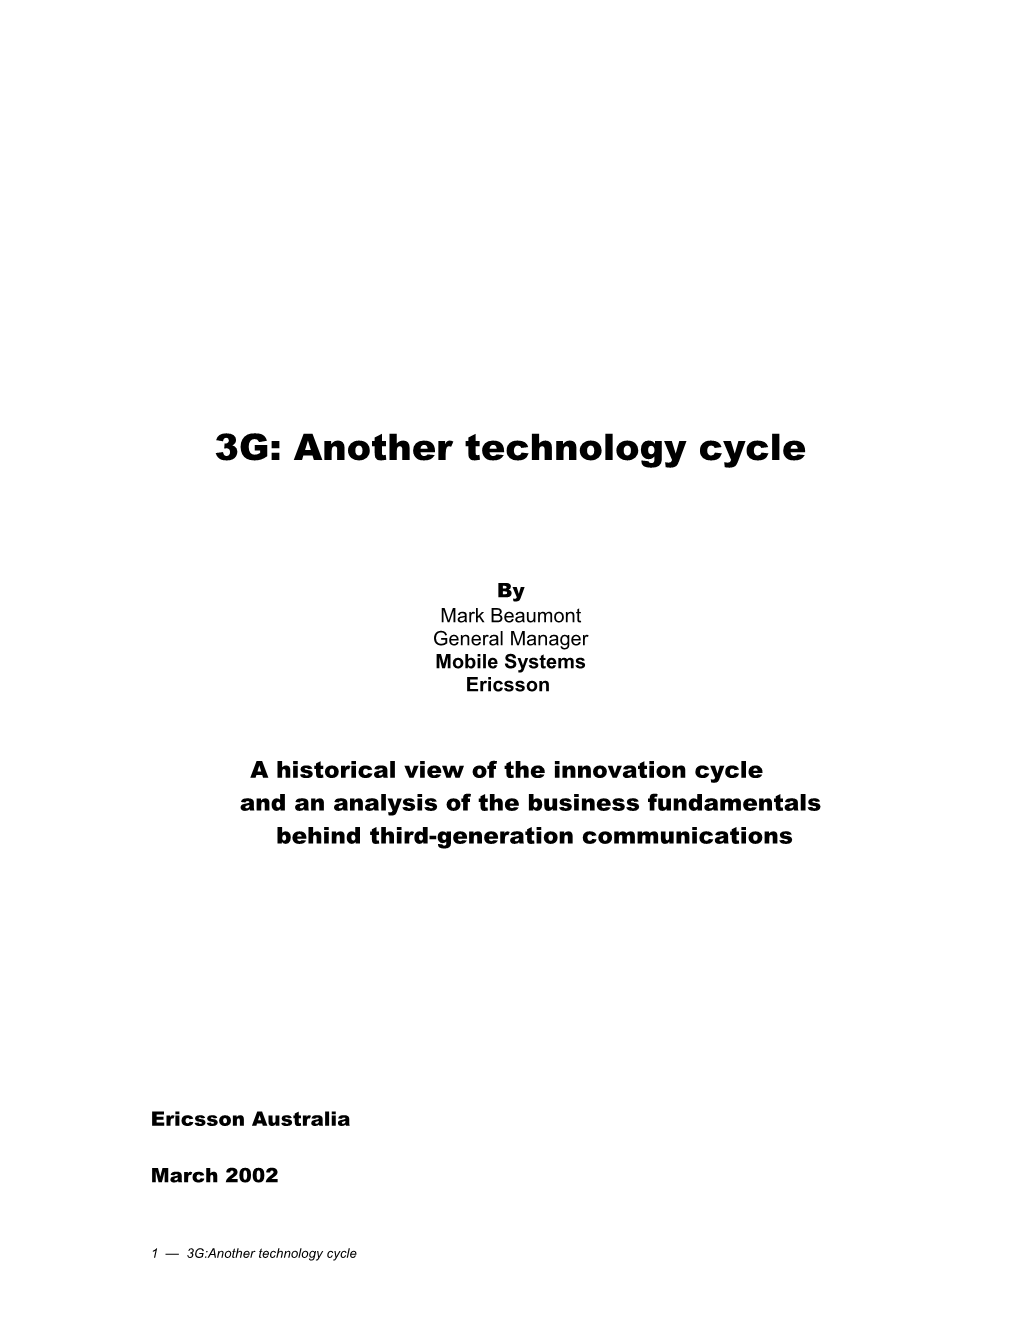 3G: Another Technology Cycle